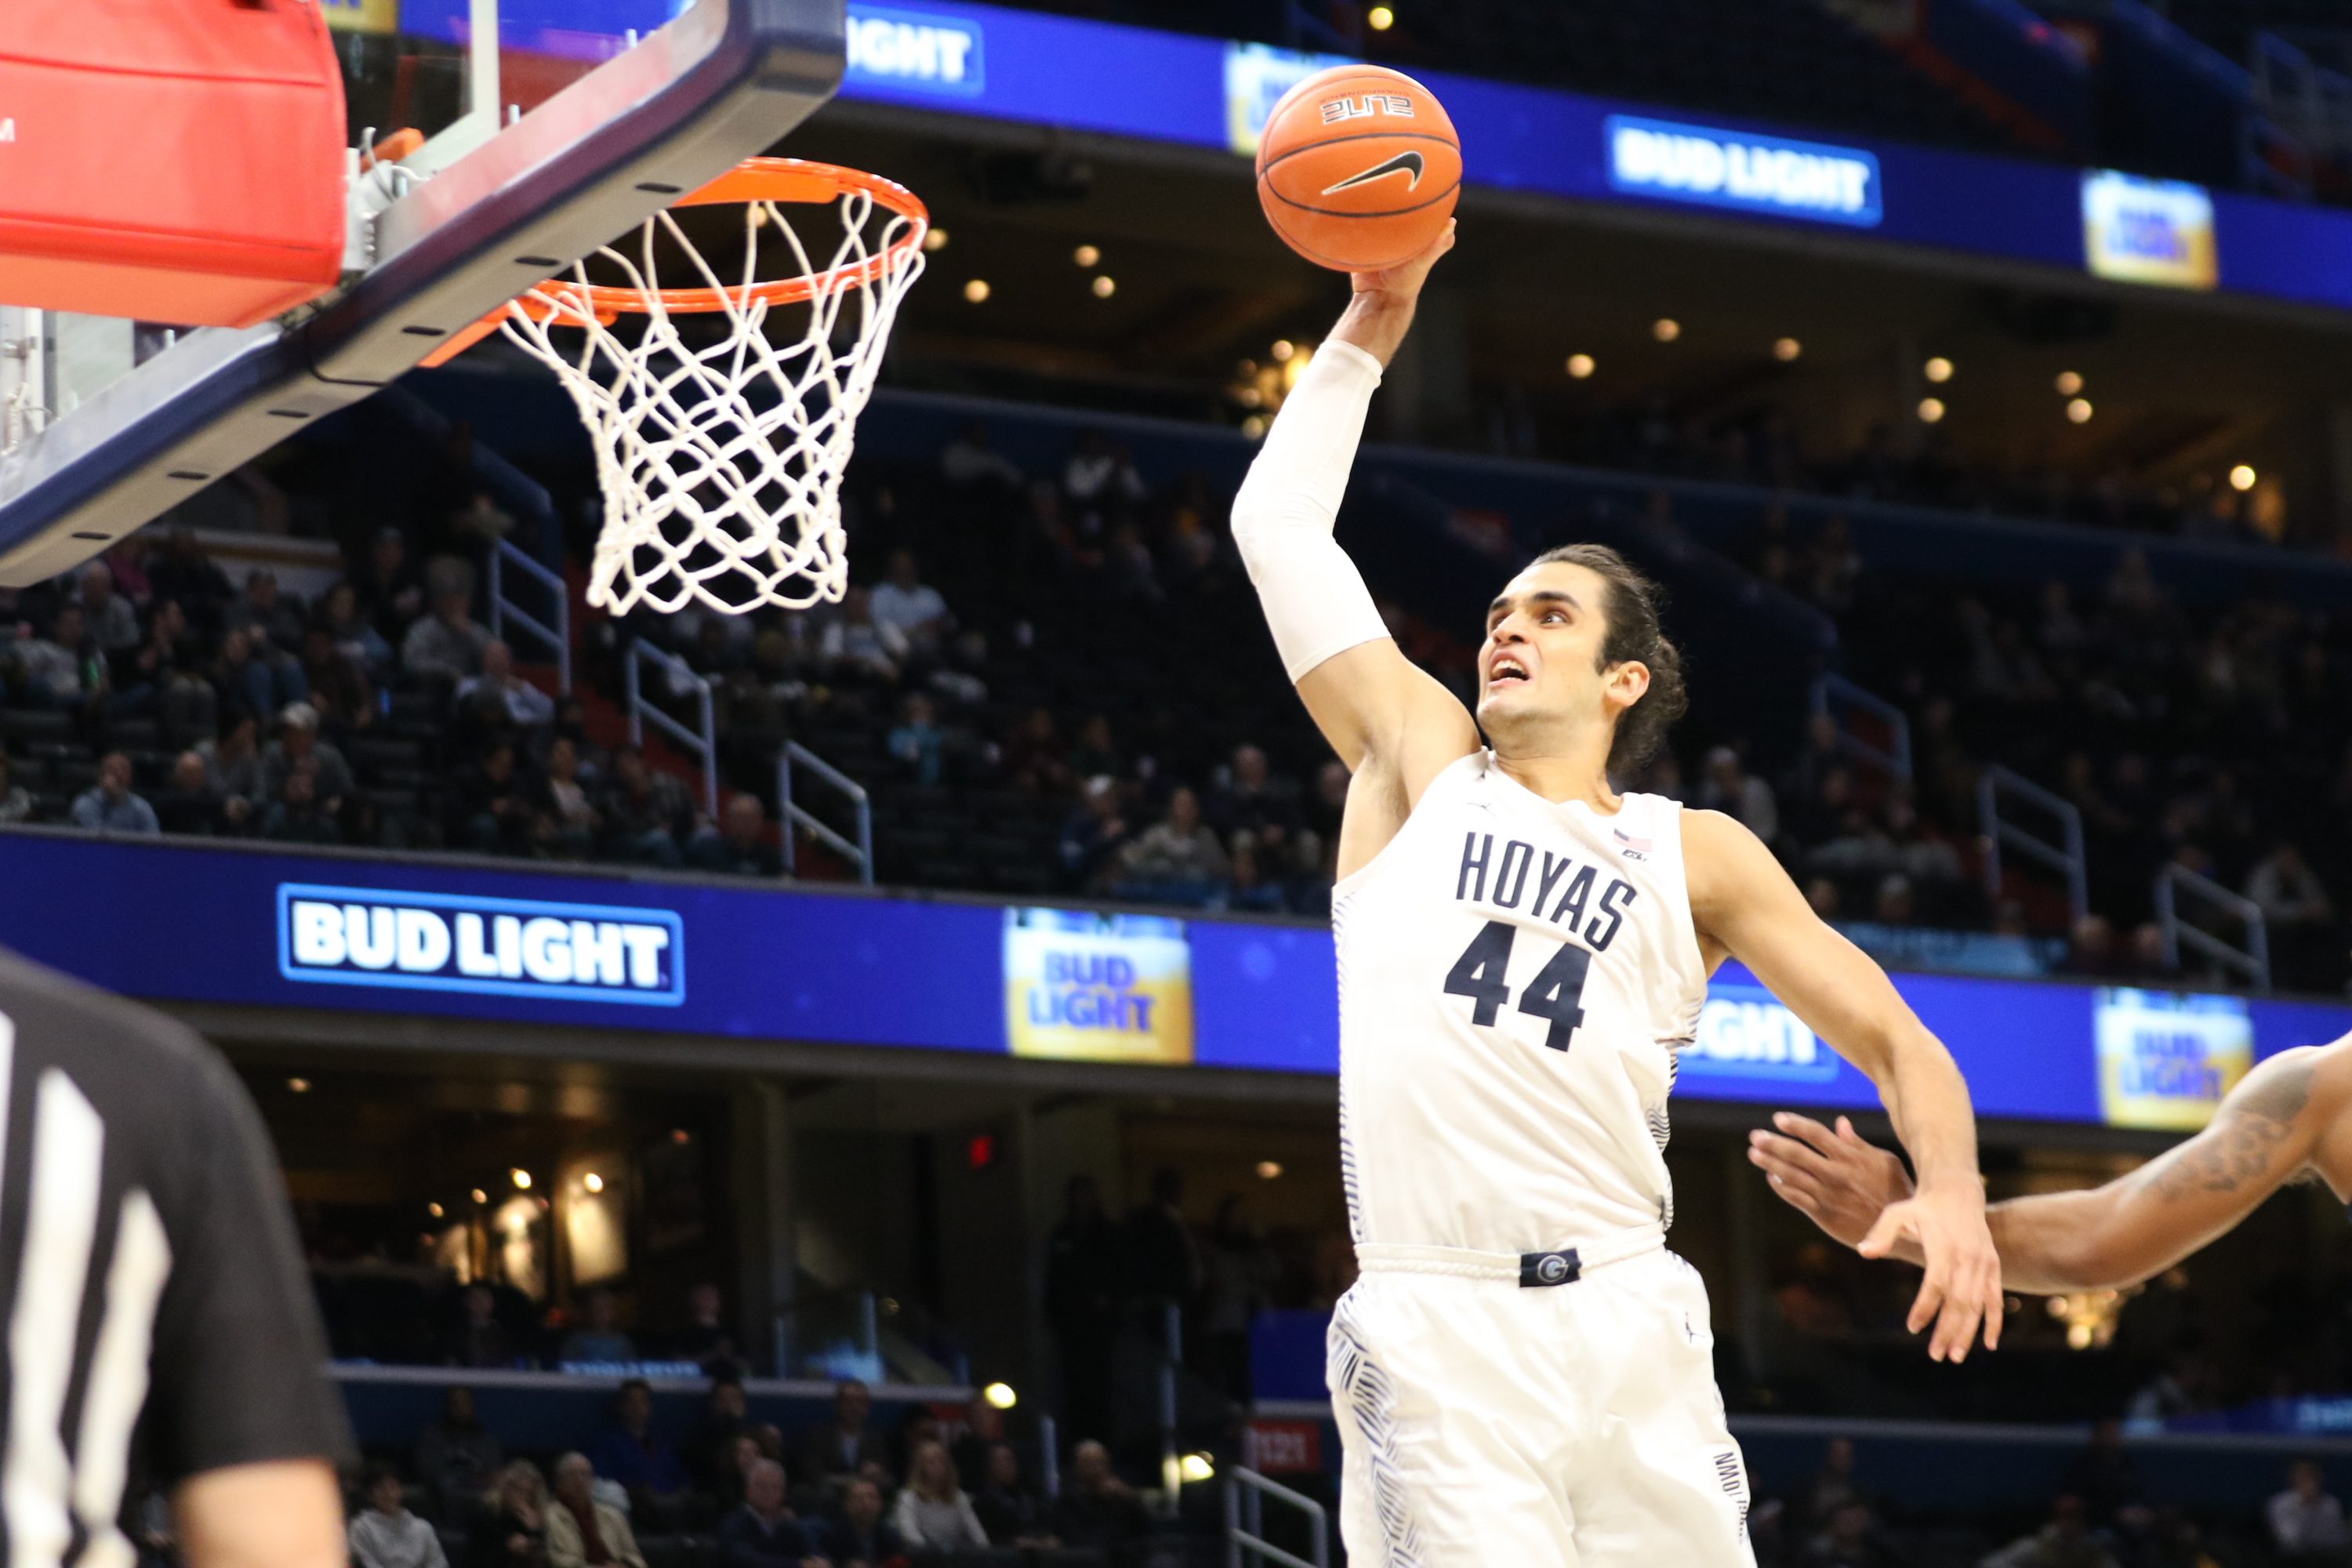 Omer Yurtseven Archives - The Georgetown Voice